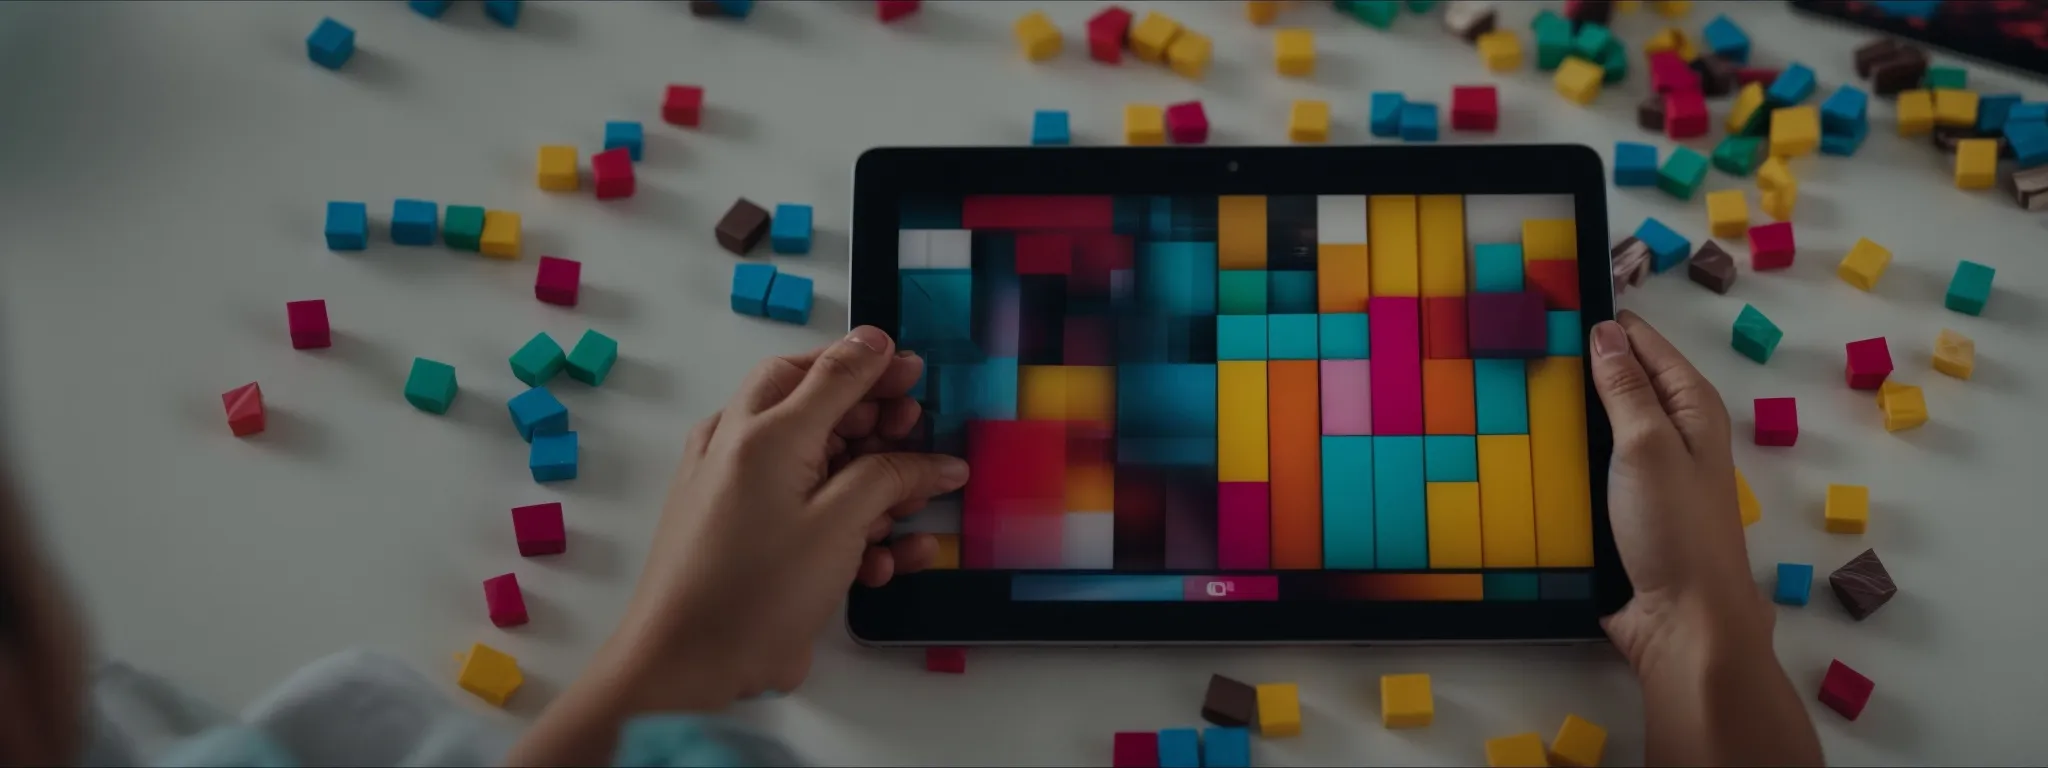 a person works intently on a digital tablet, arranging colorful blocks that symbolize content elements on a virtual marketing strategy board.